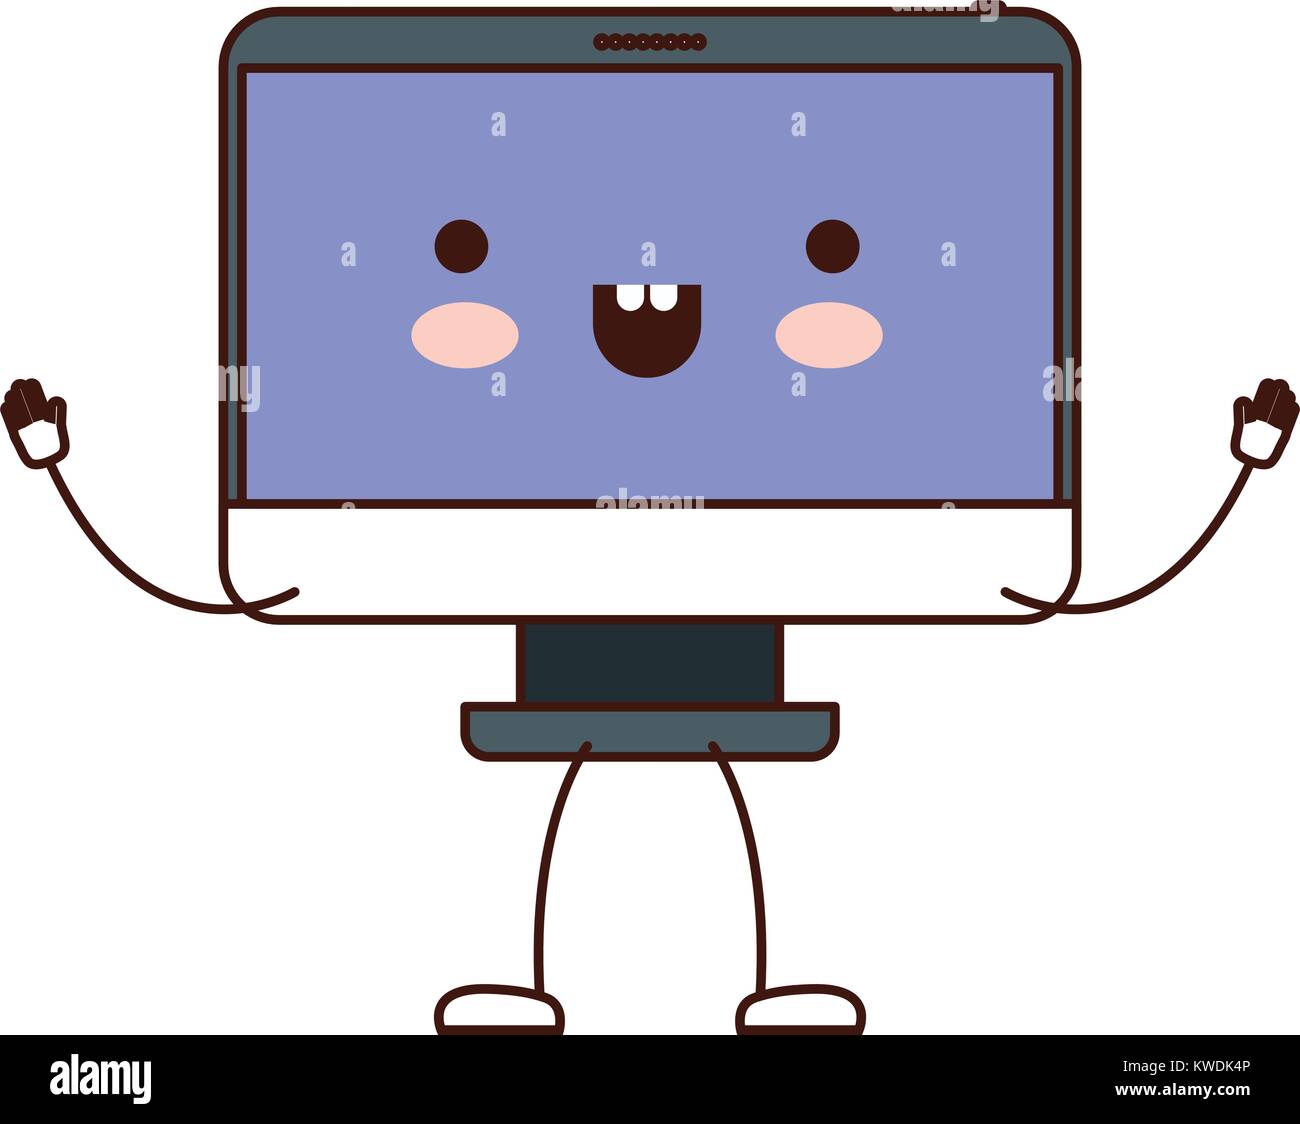 animated kawaii desktop computer in colorful silhouette Stock Vector ...